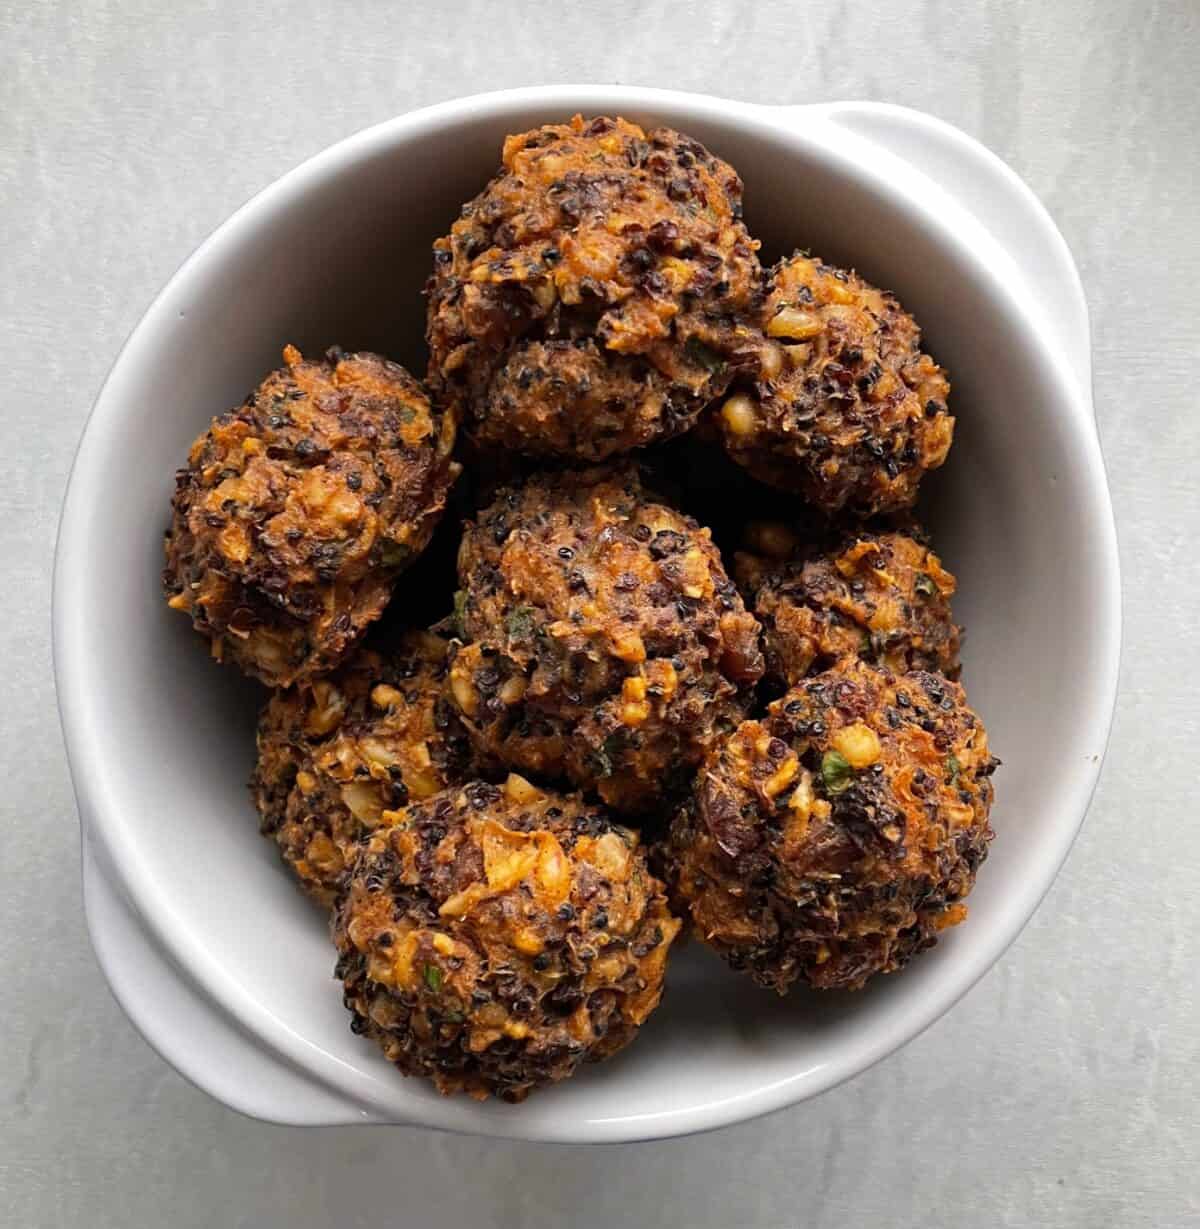 baked quinoa balls in a small bowl.